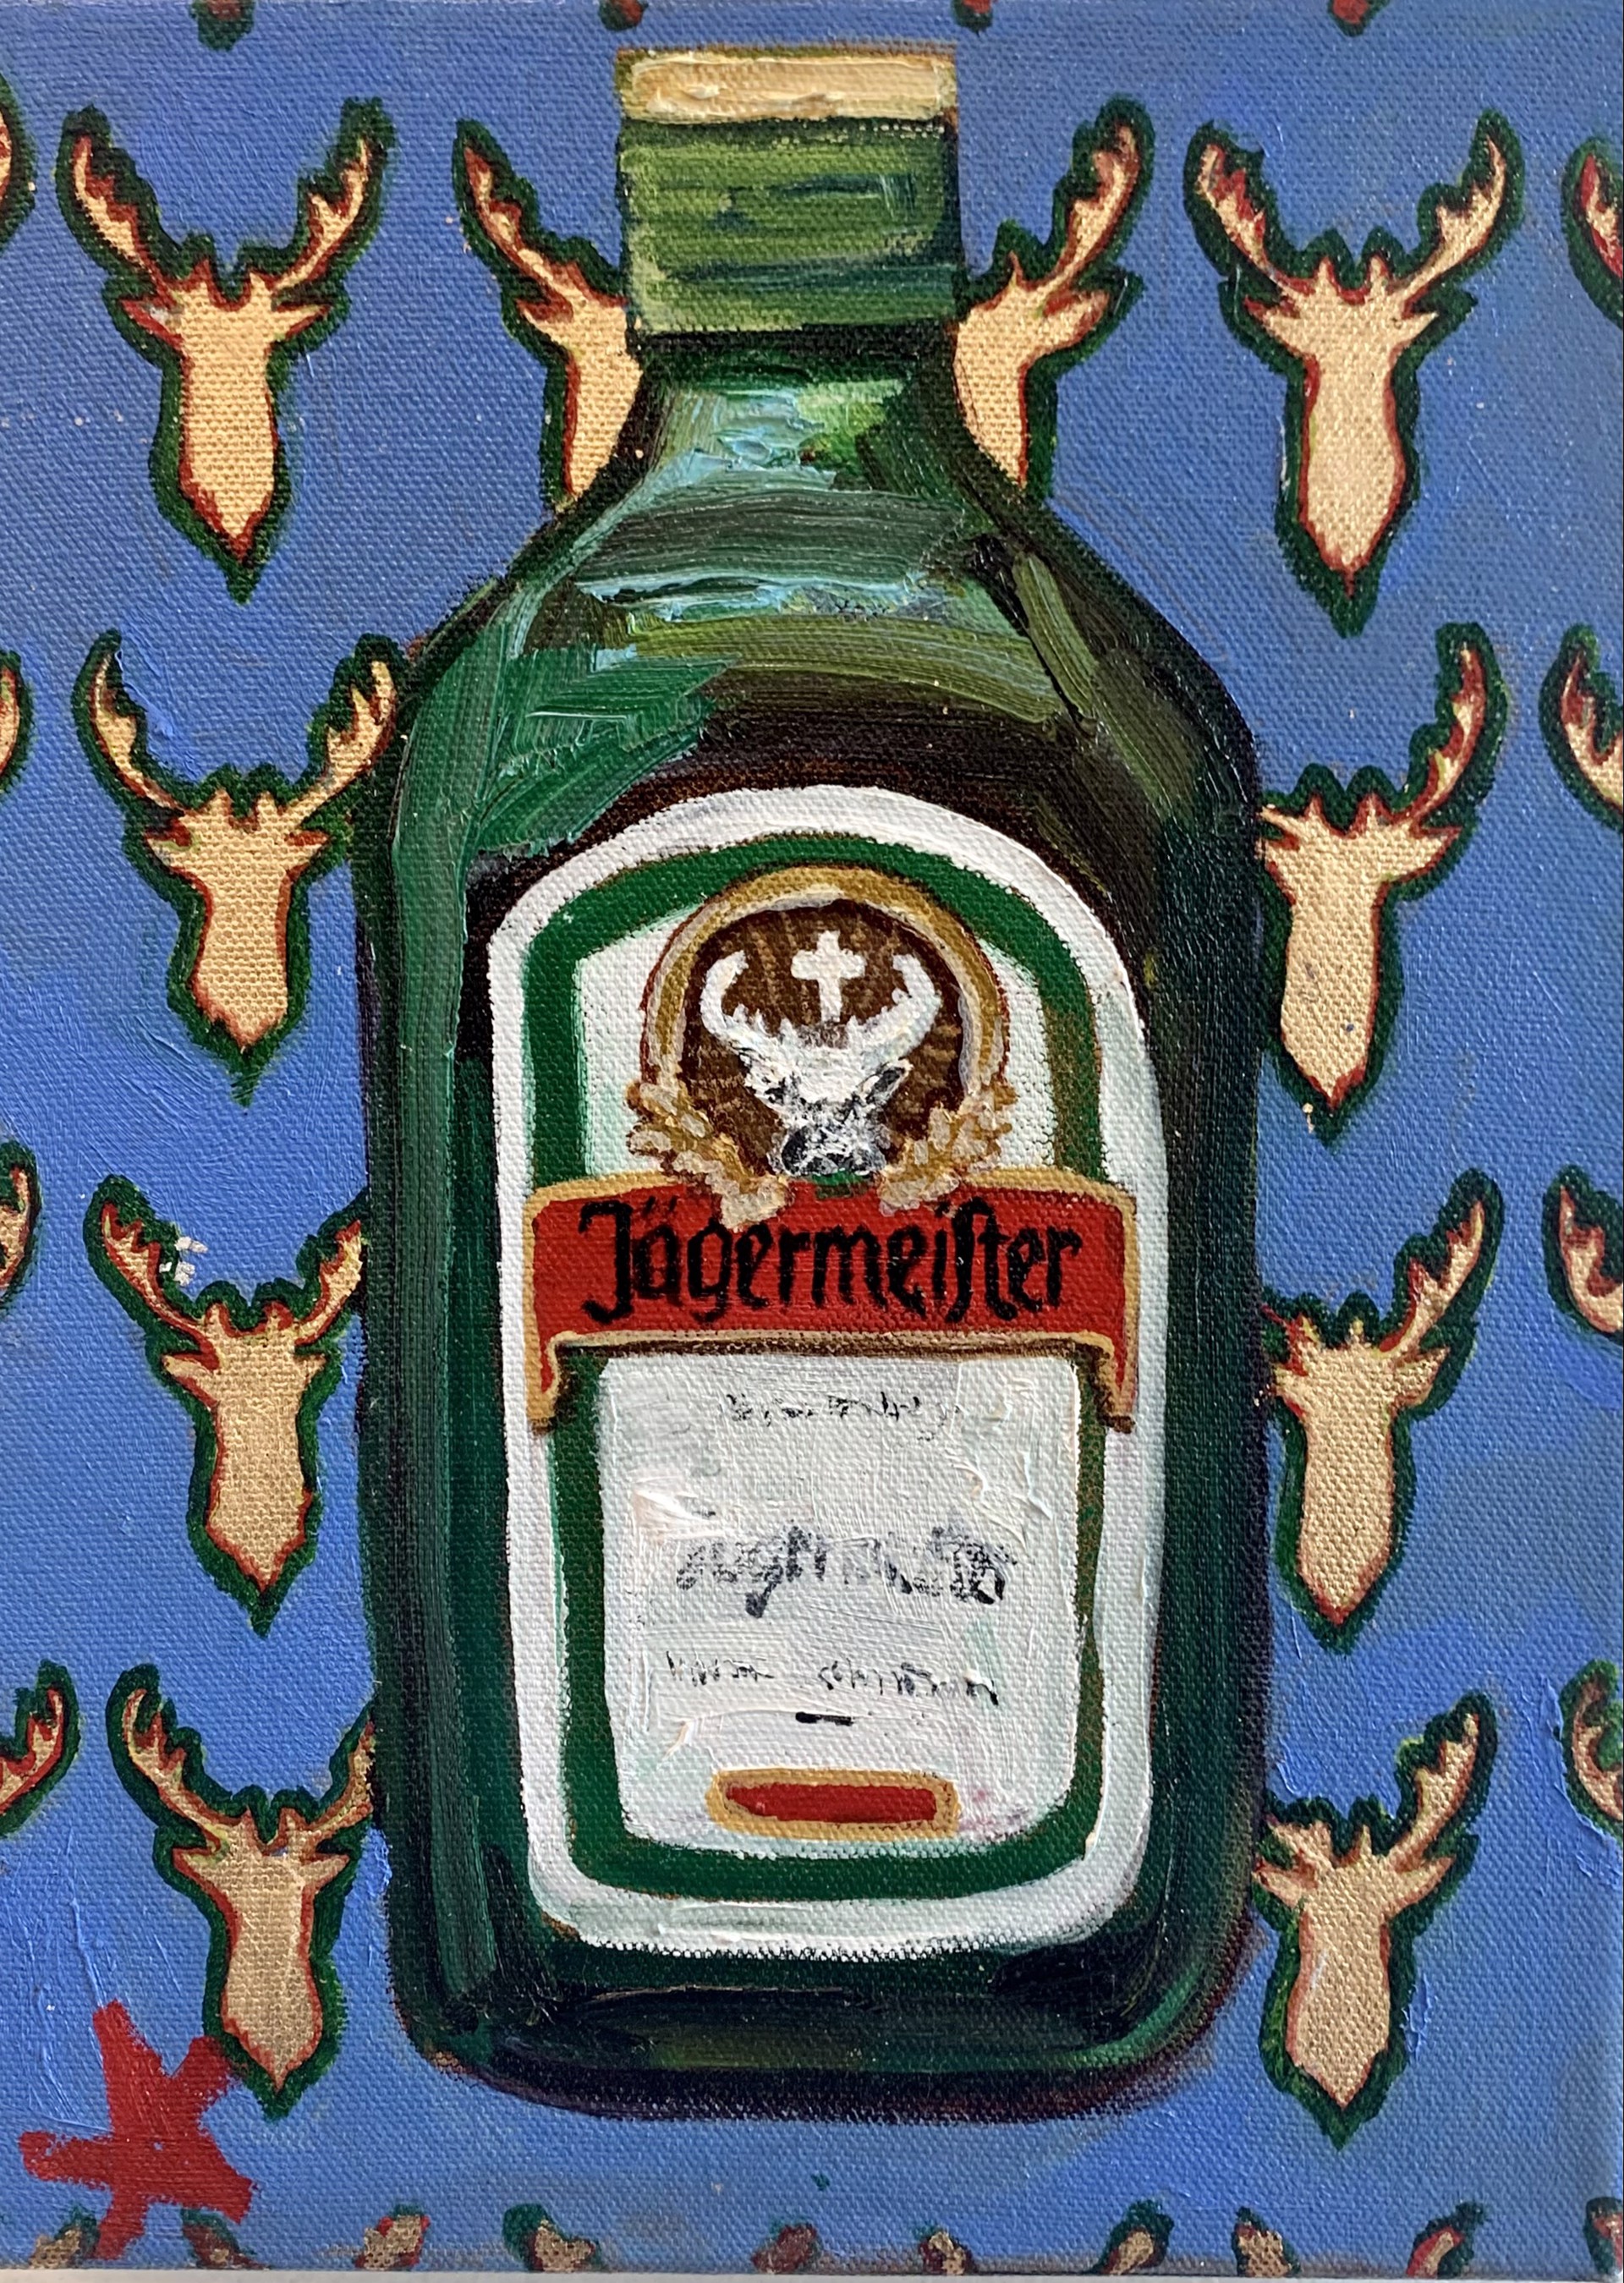 Jagermeister by Starr Marchand